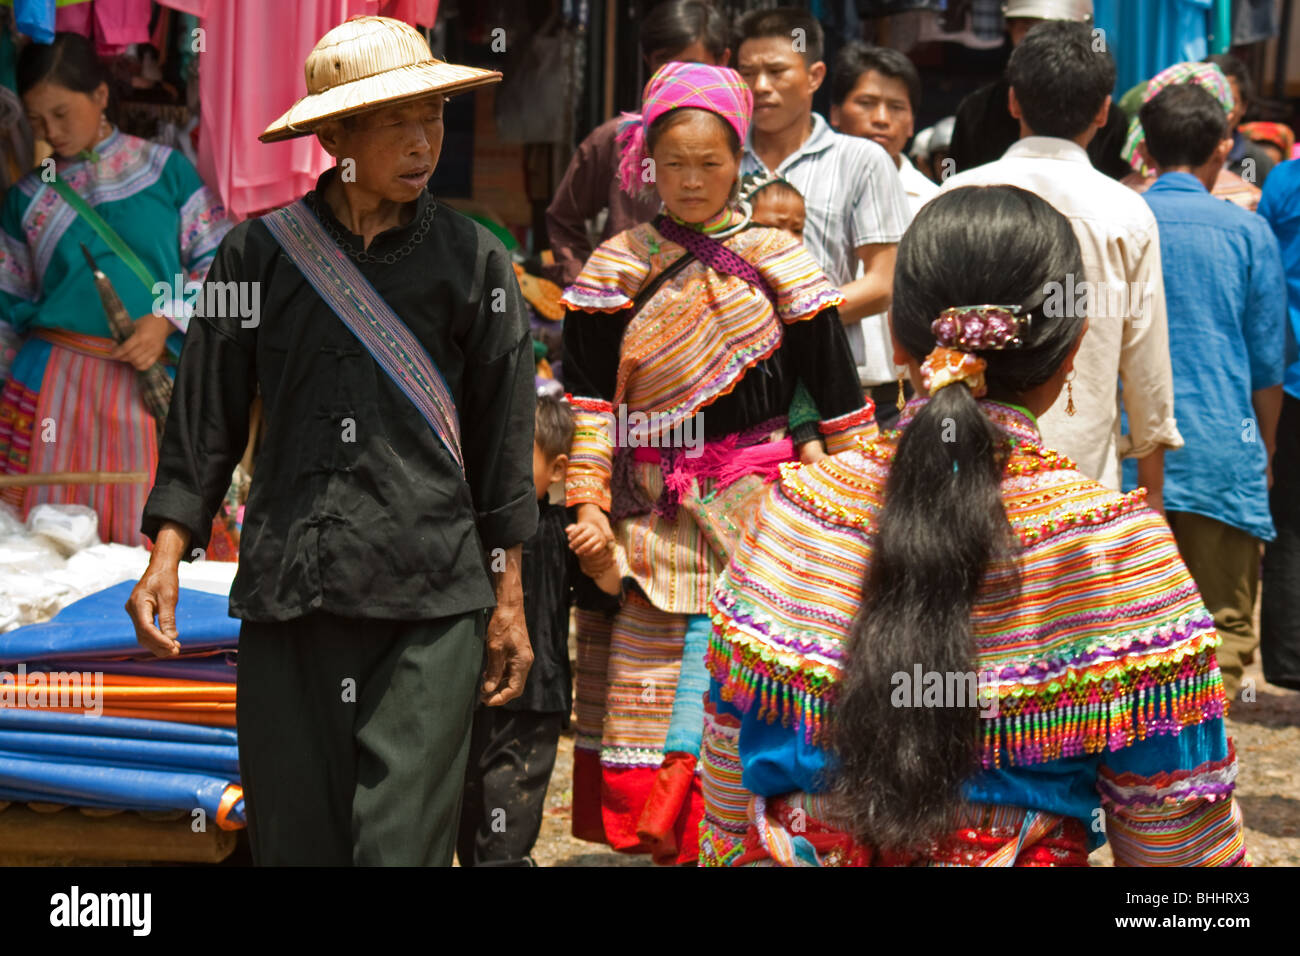 Members of the Flower H'mong ethnic minority group at Bac Ha market in North Vietnam. Stock Photo